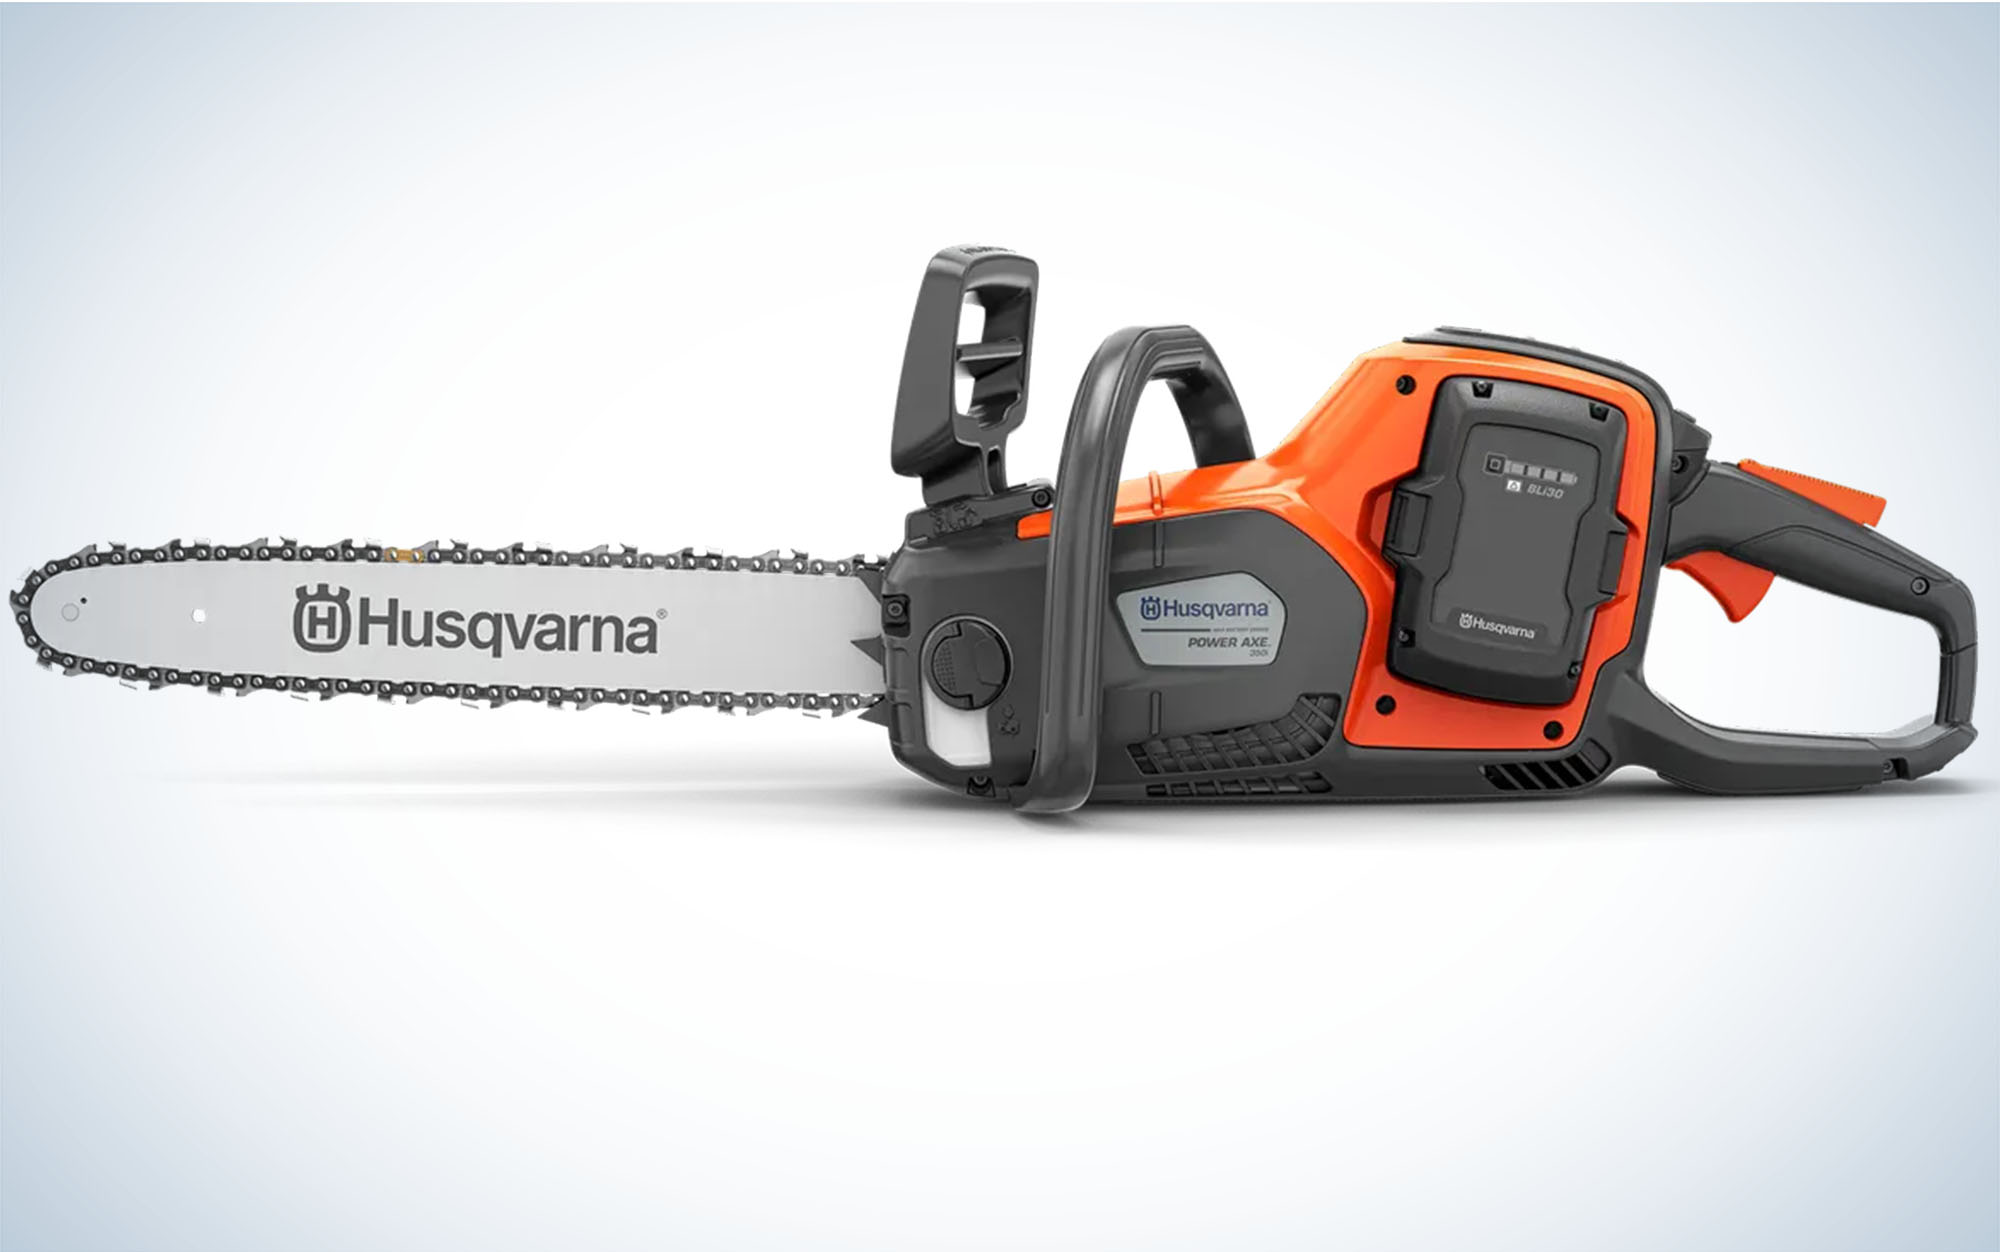 The Husqvarna Power Axe 350i is the best large-size electric chainsaw.